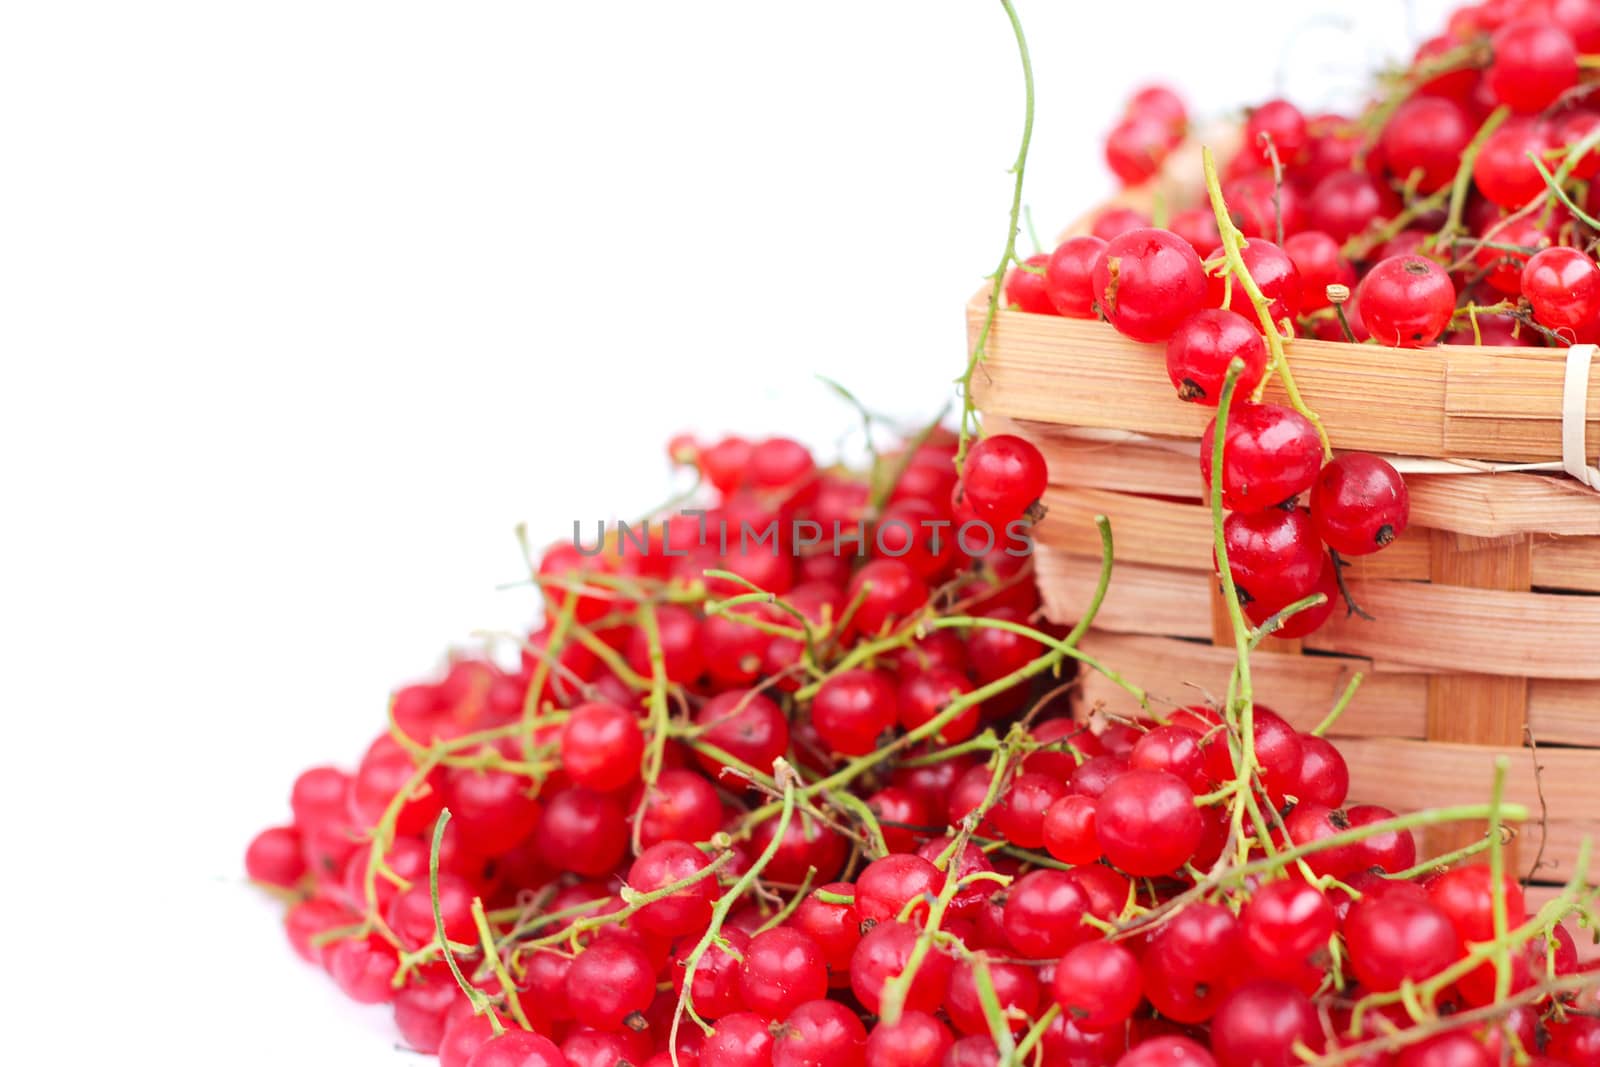 Harvested red currant berries in a small basket isolated on white background